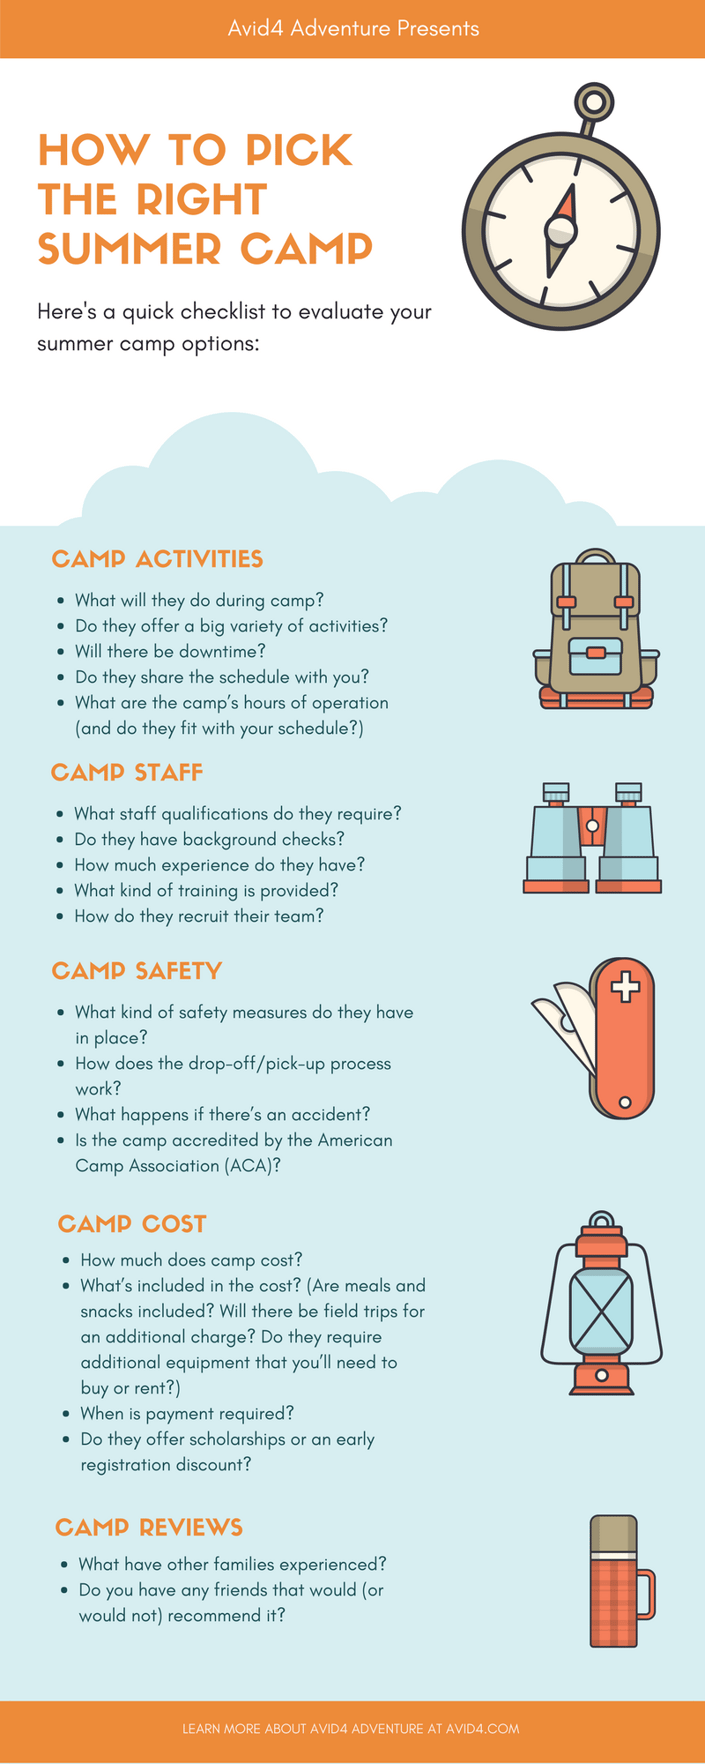 How-to-choose-the-right-summer-camp-questions.png